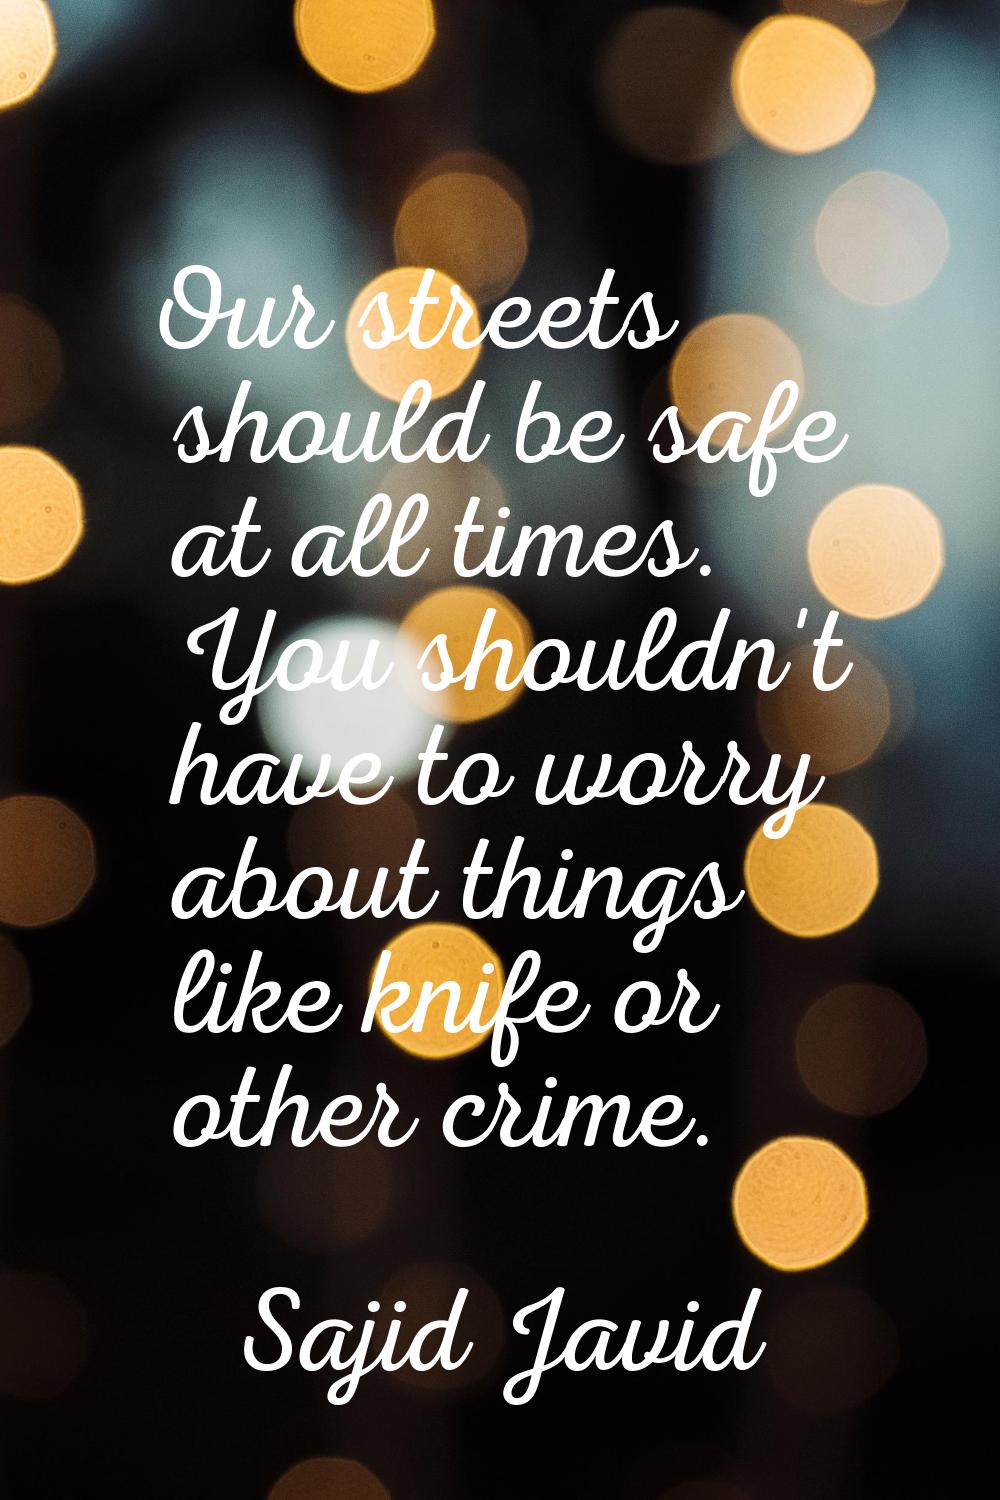 Our streets should be safe at all times. You shouldn't have to worry about things like knife or oth